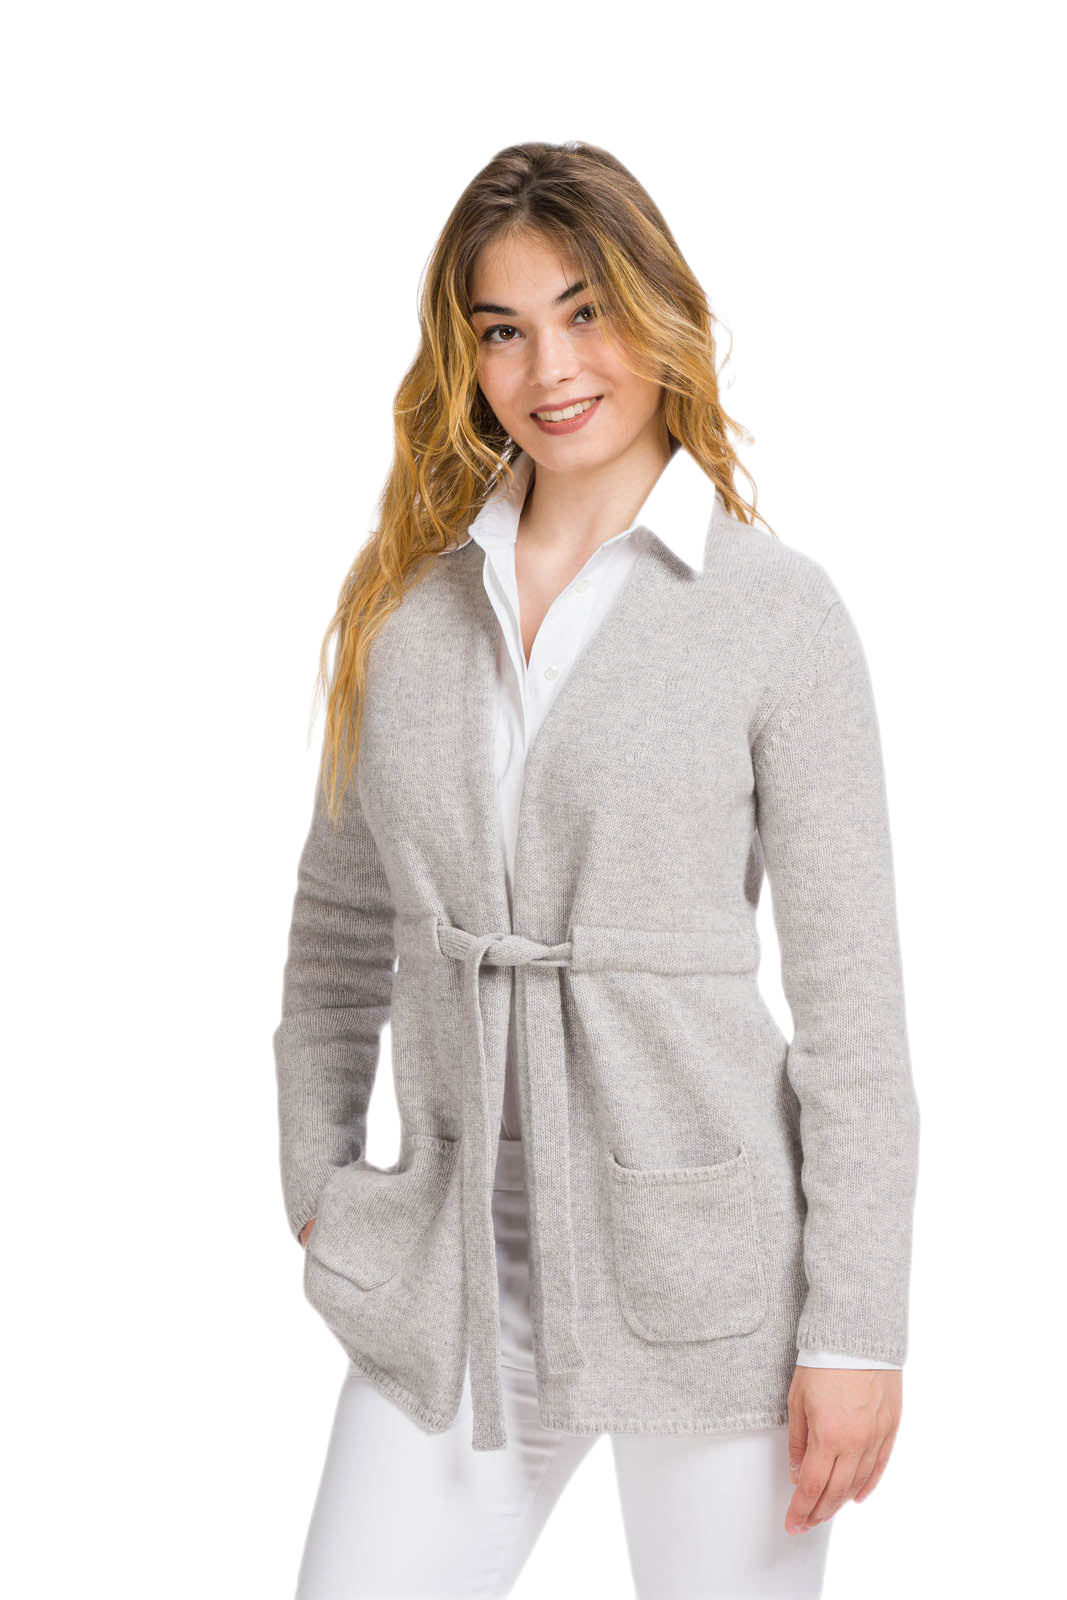 Women's wool and cashmere cardigan